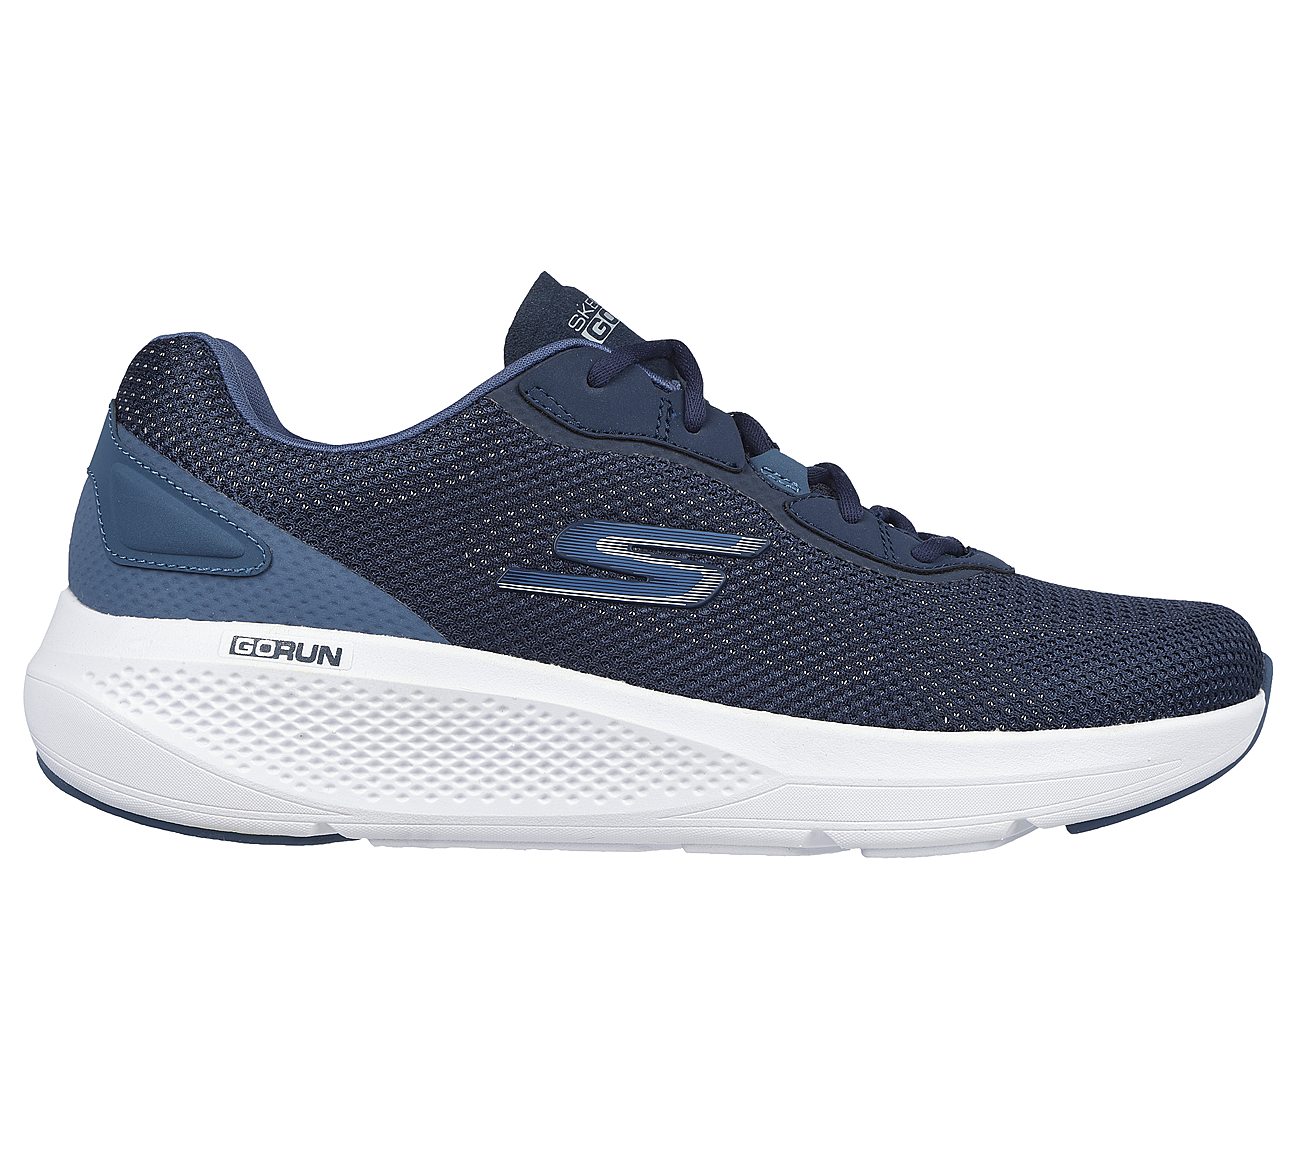 Experience more than 132 skechers shoes